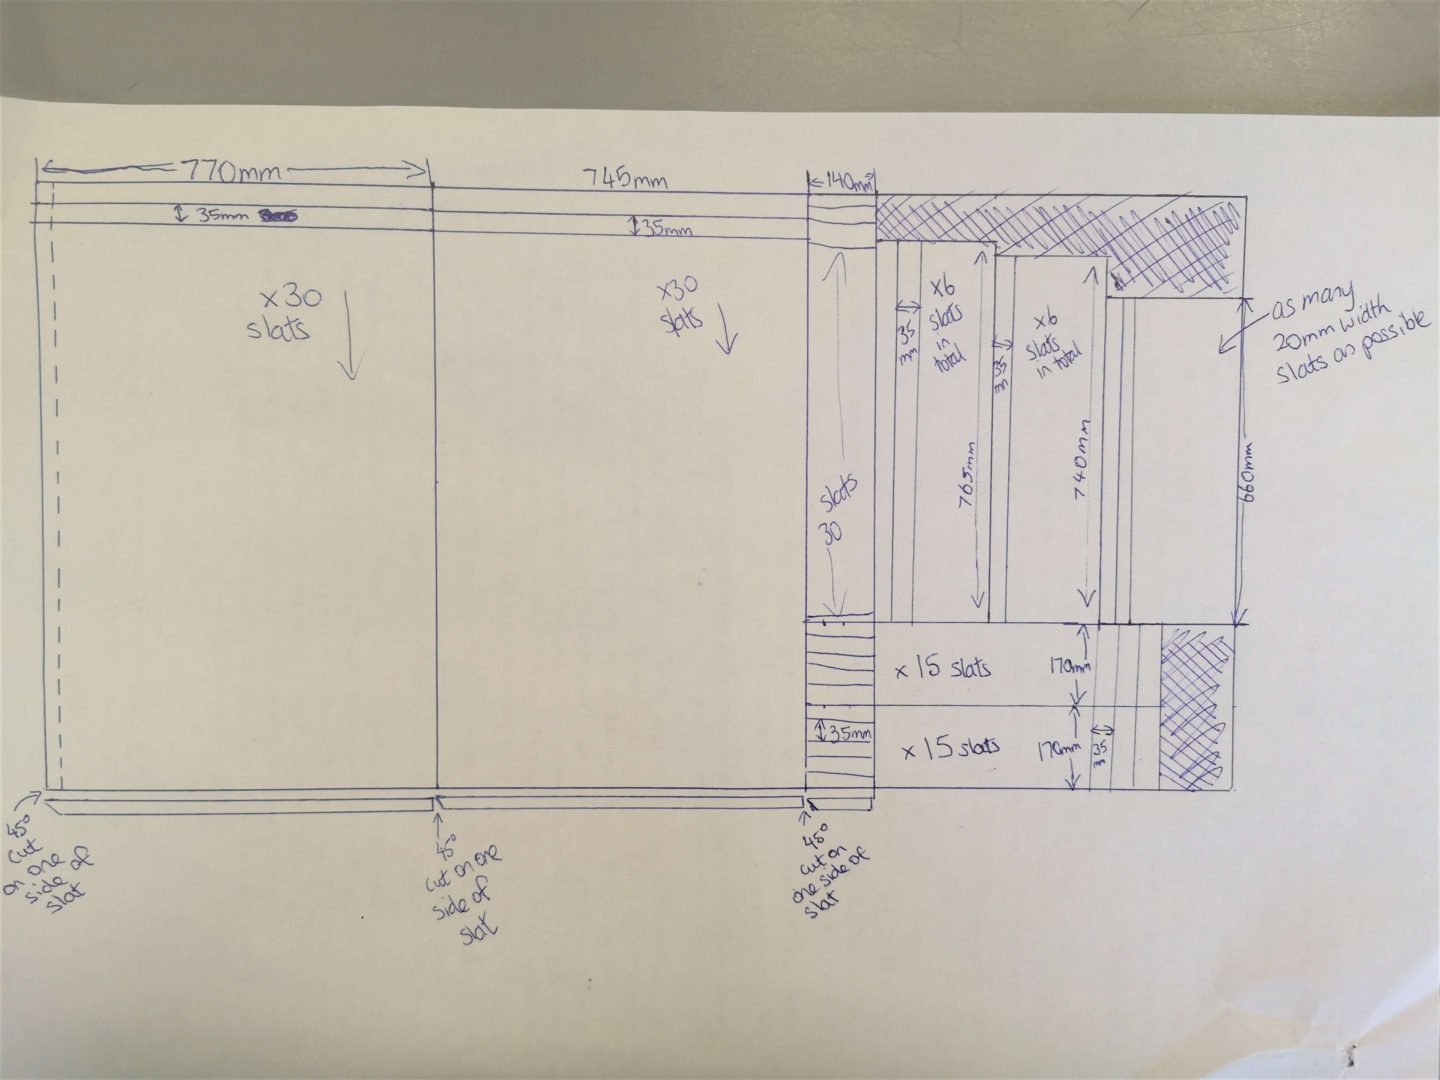 Plan of how to cut a sheet of MDF into slats to form two radiator covers.